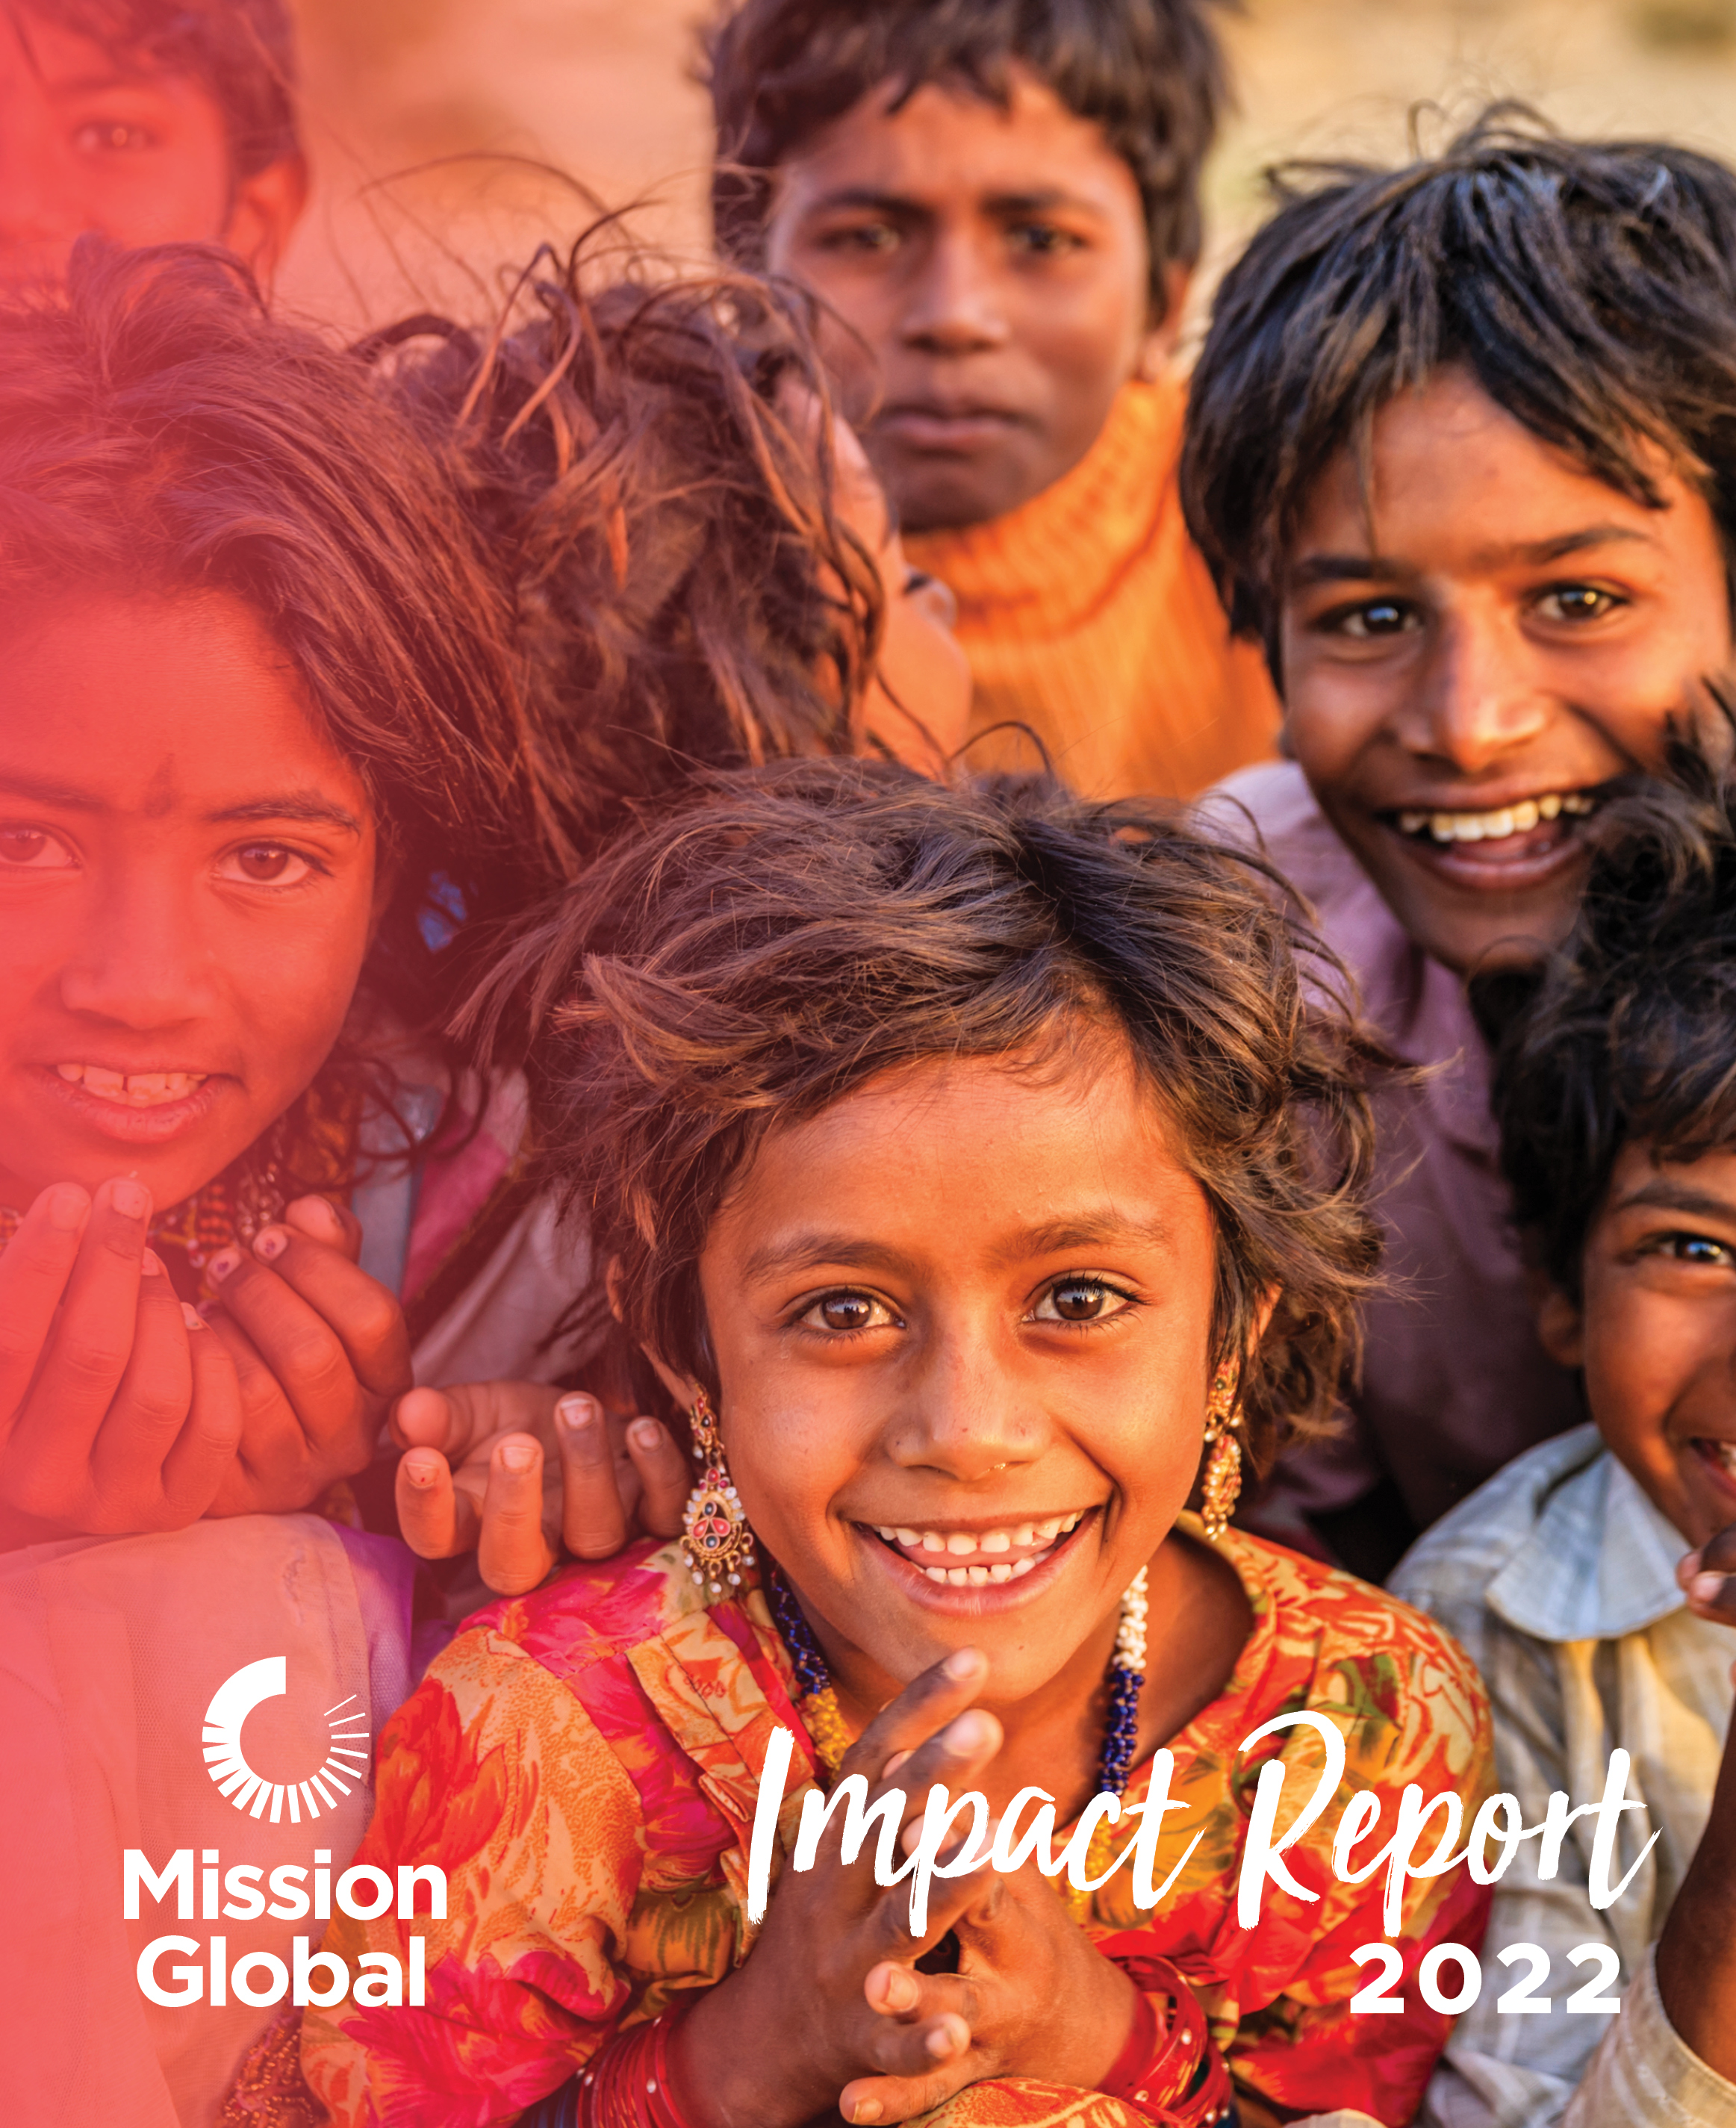 Cover of the 2022 Impact Report of a group of children smiling at the camera.